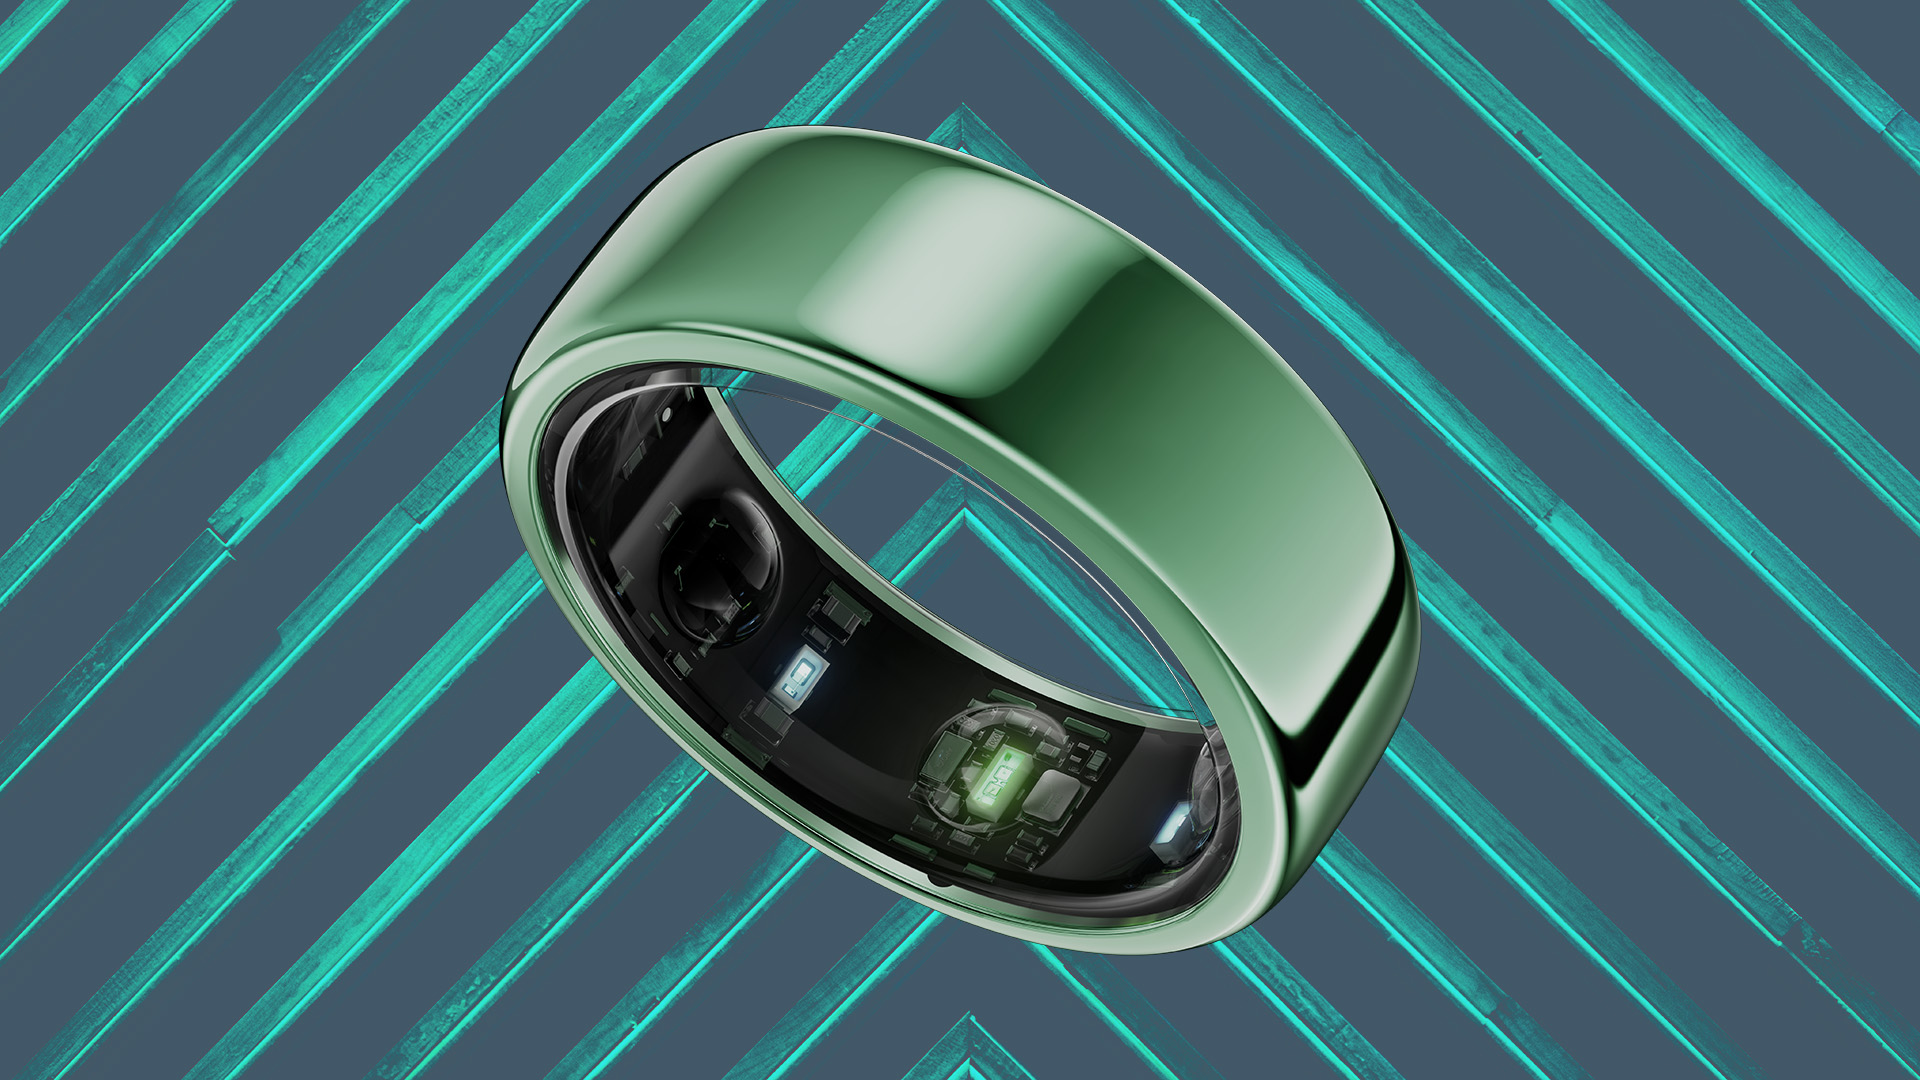 Apple and Samsung working on rival smart rings - reports | The Independent